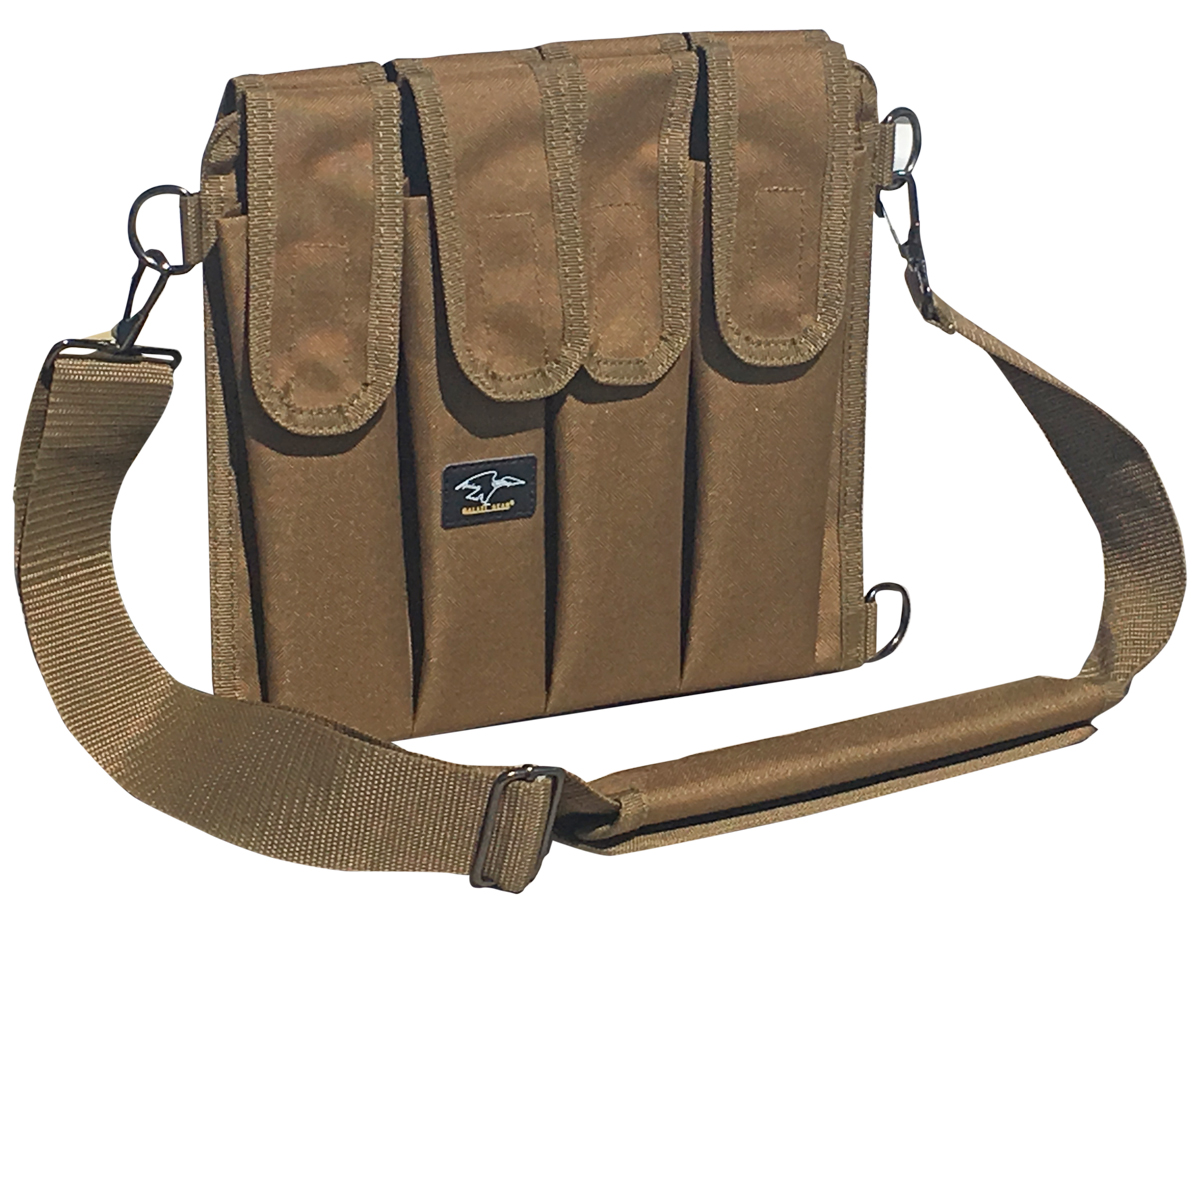 Save now on 9mm Shoulder Magazine Pouch - Holds 8 - Coyote Brown - Galati G...